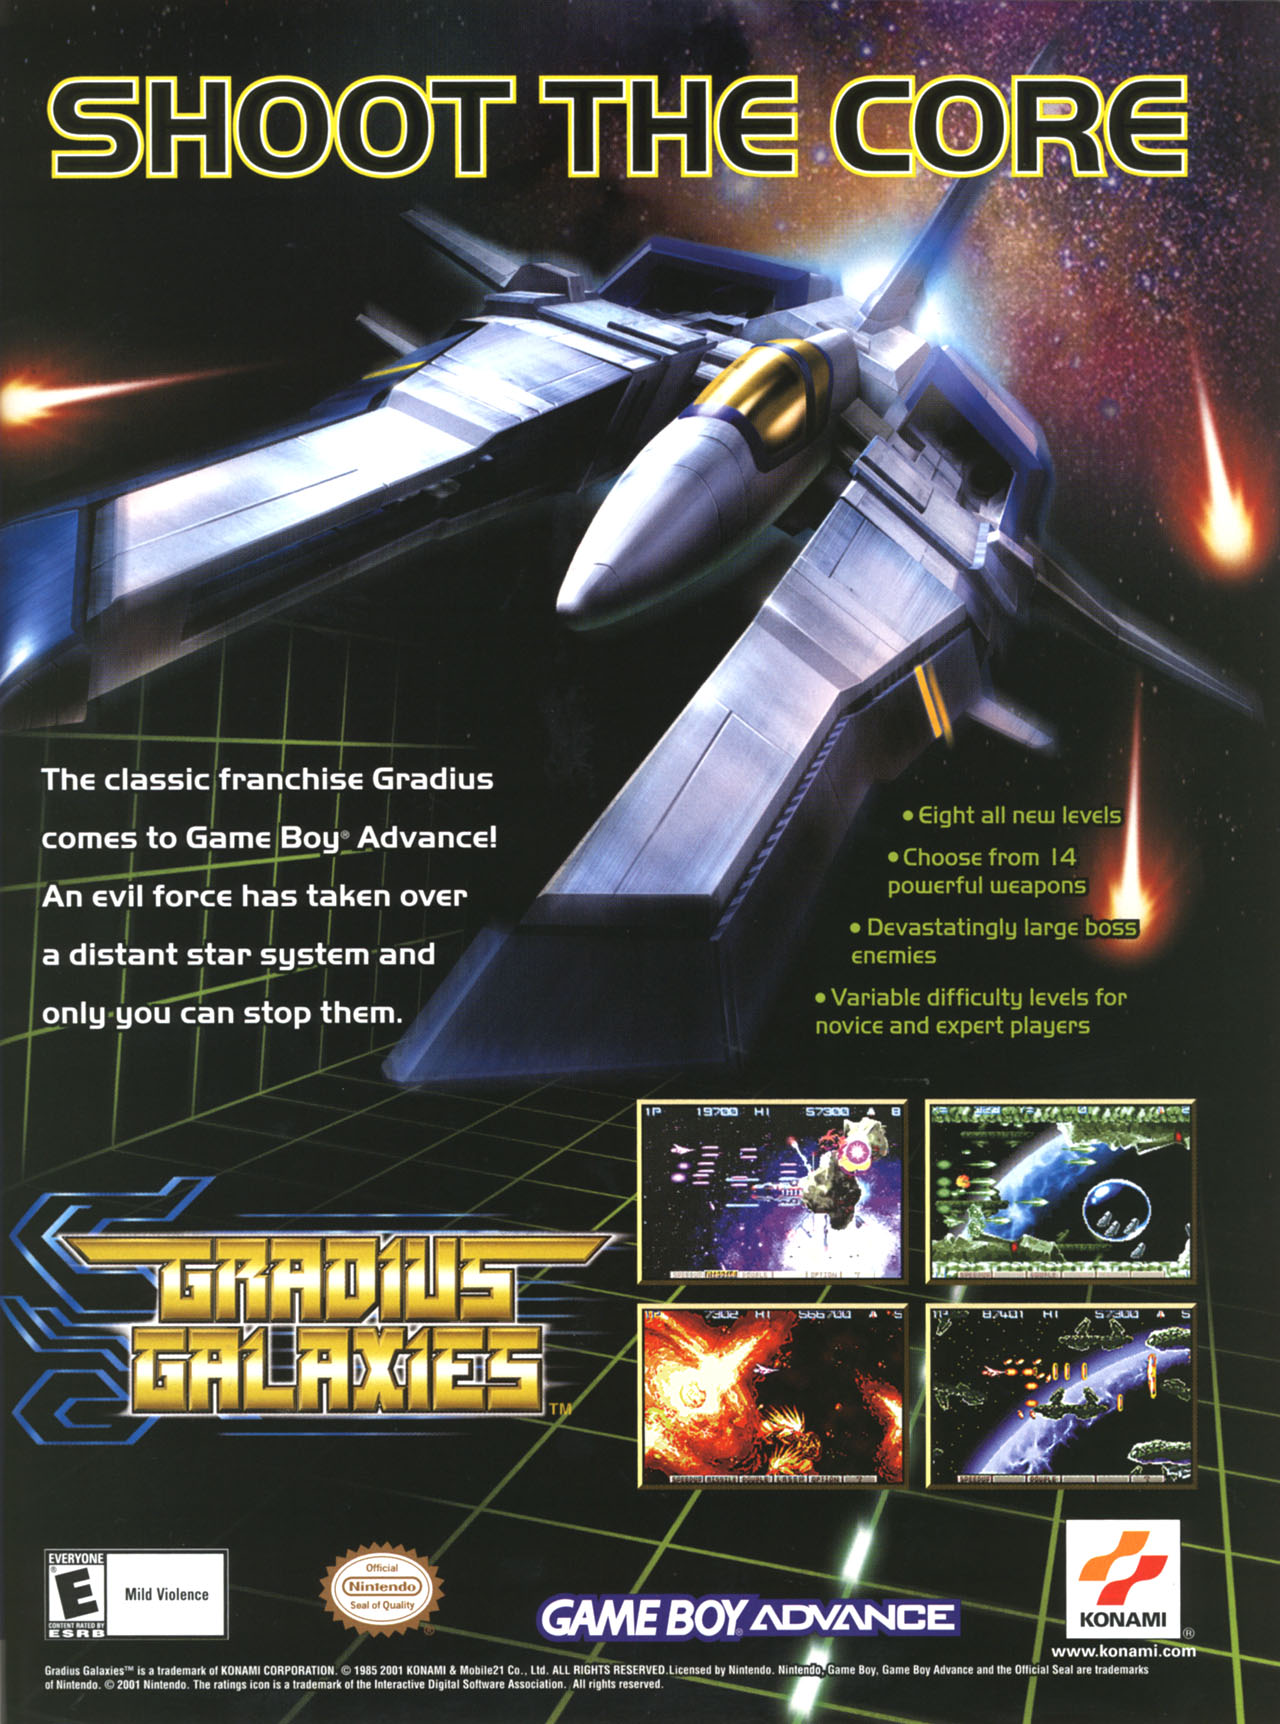 Another Gradius side story. Gradius Galaxies takes place between Gradius III and Gradius Gaiden, with a previously forgotten Bacterion weapon being rediscovered and the Vic Viper being sent to destroy […]